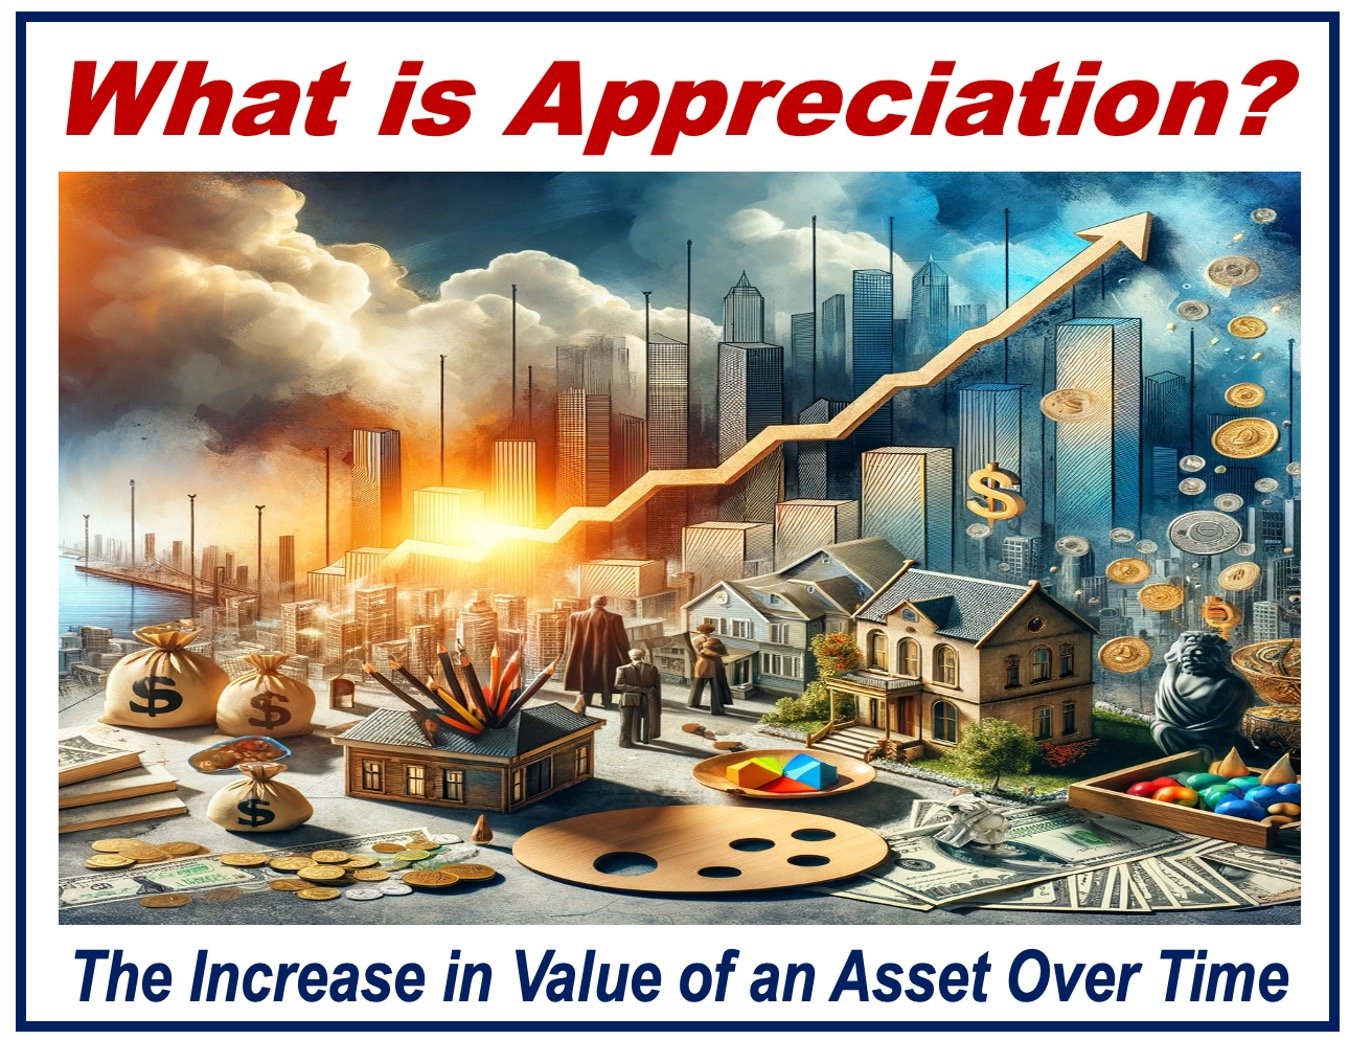 Illustration of currencies, coins, rising graphs, and property depicting the concept of appreciation